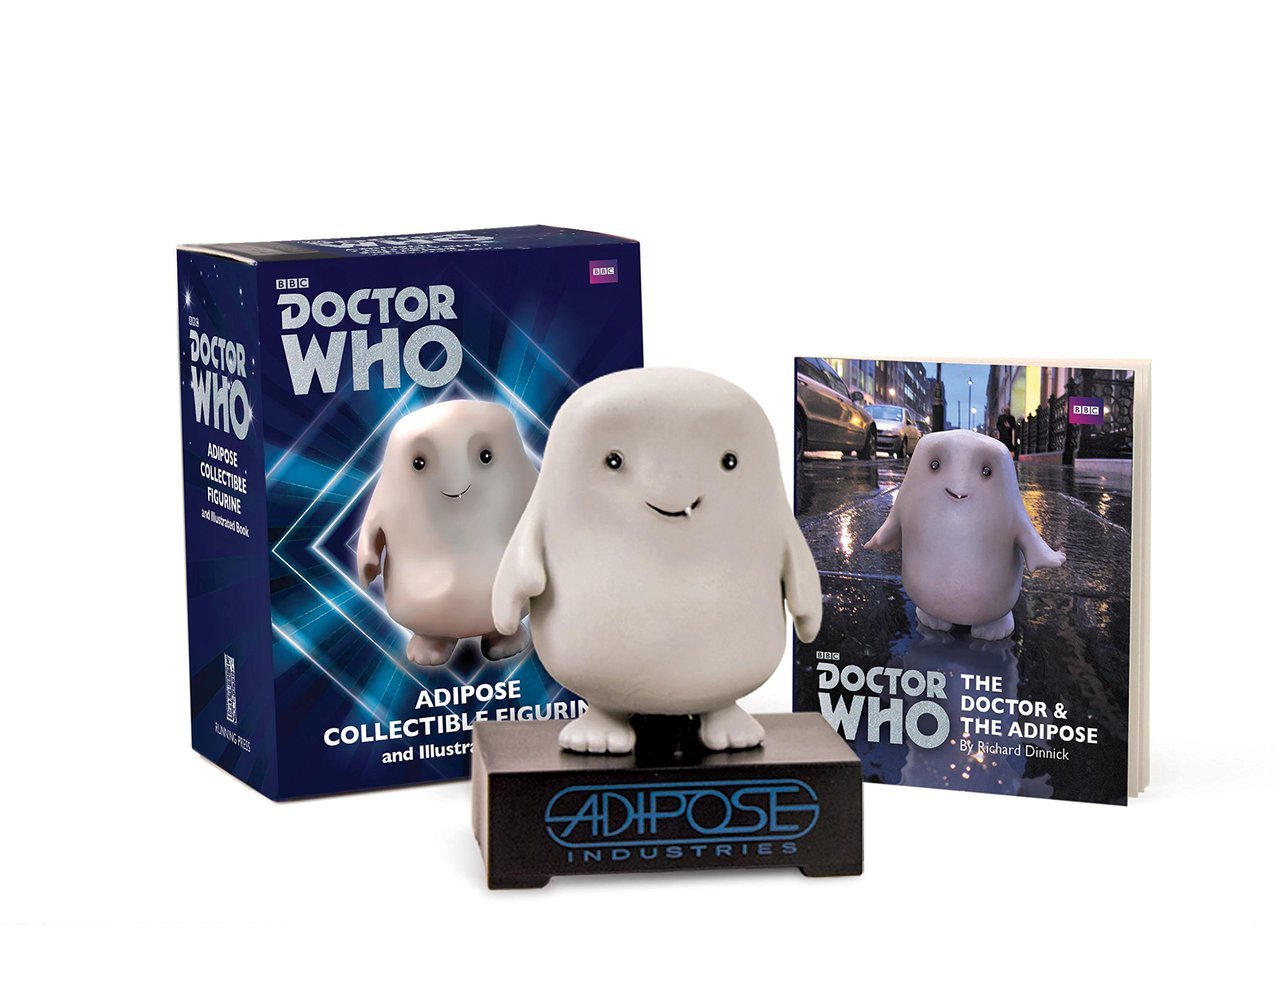 doctor-who-adipose-collectible-figurine-and-illustrated-book.jpg